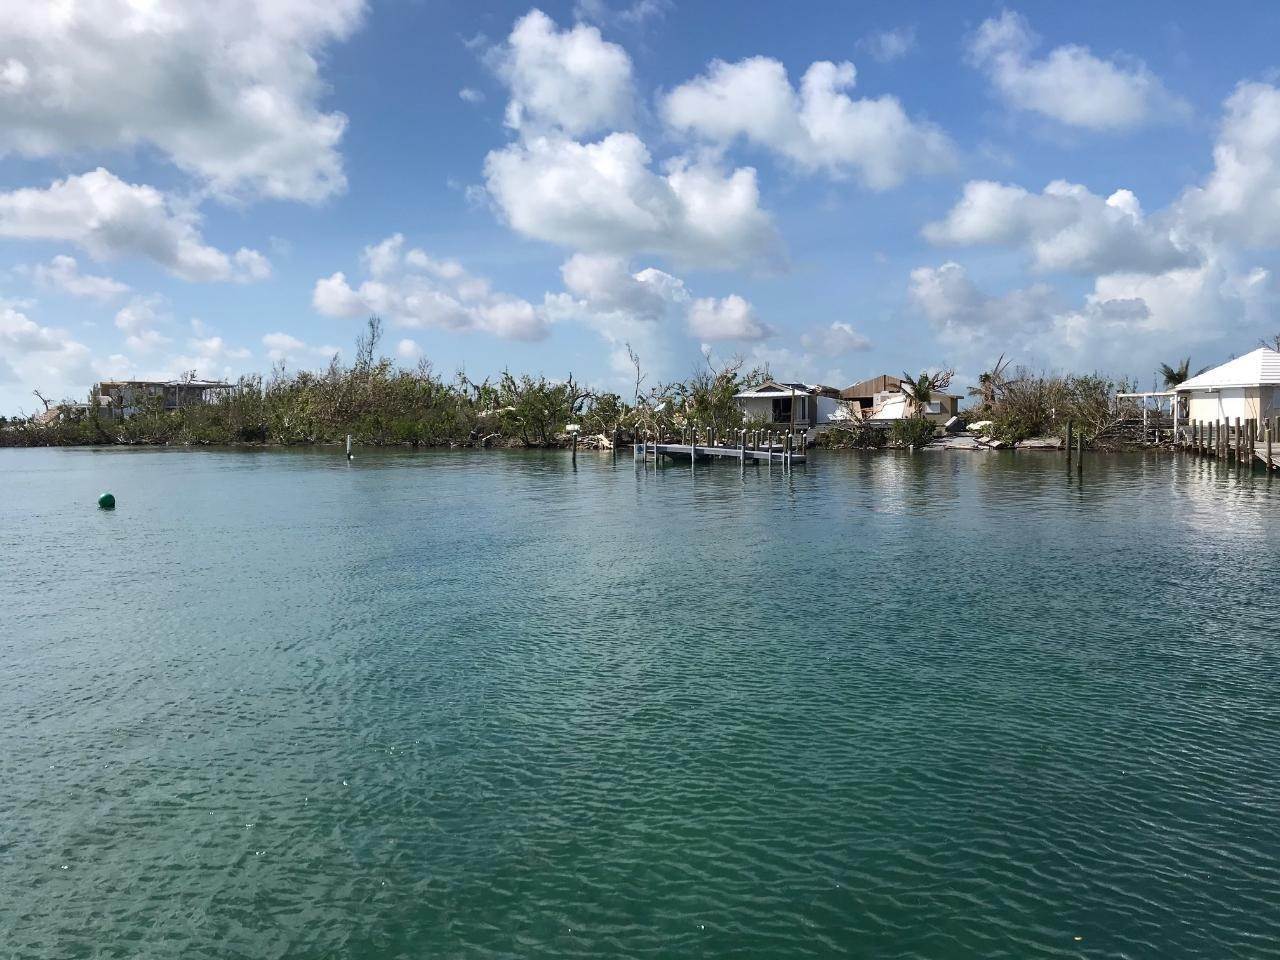 3. Lots / Acreage for Sale at Green Turtle Cay, Abaco, Bahamas